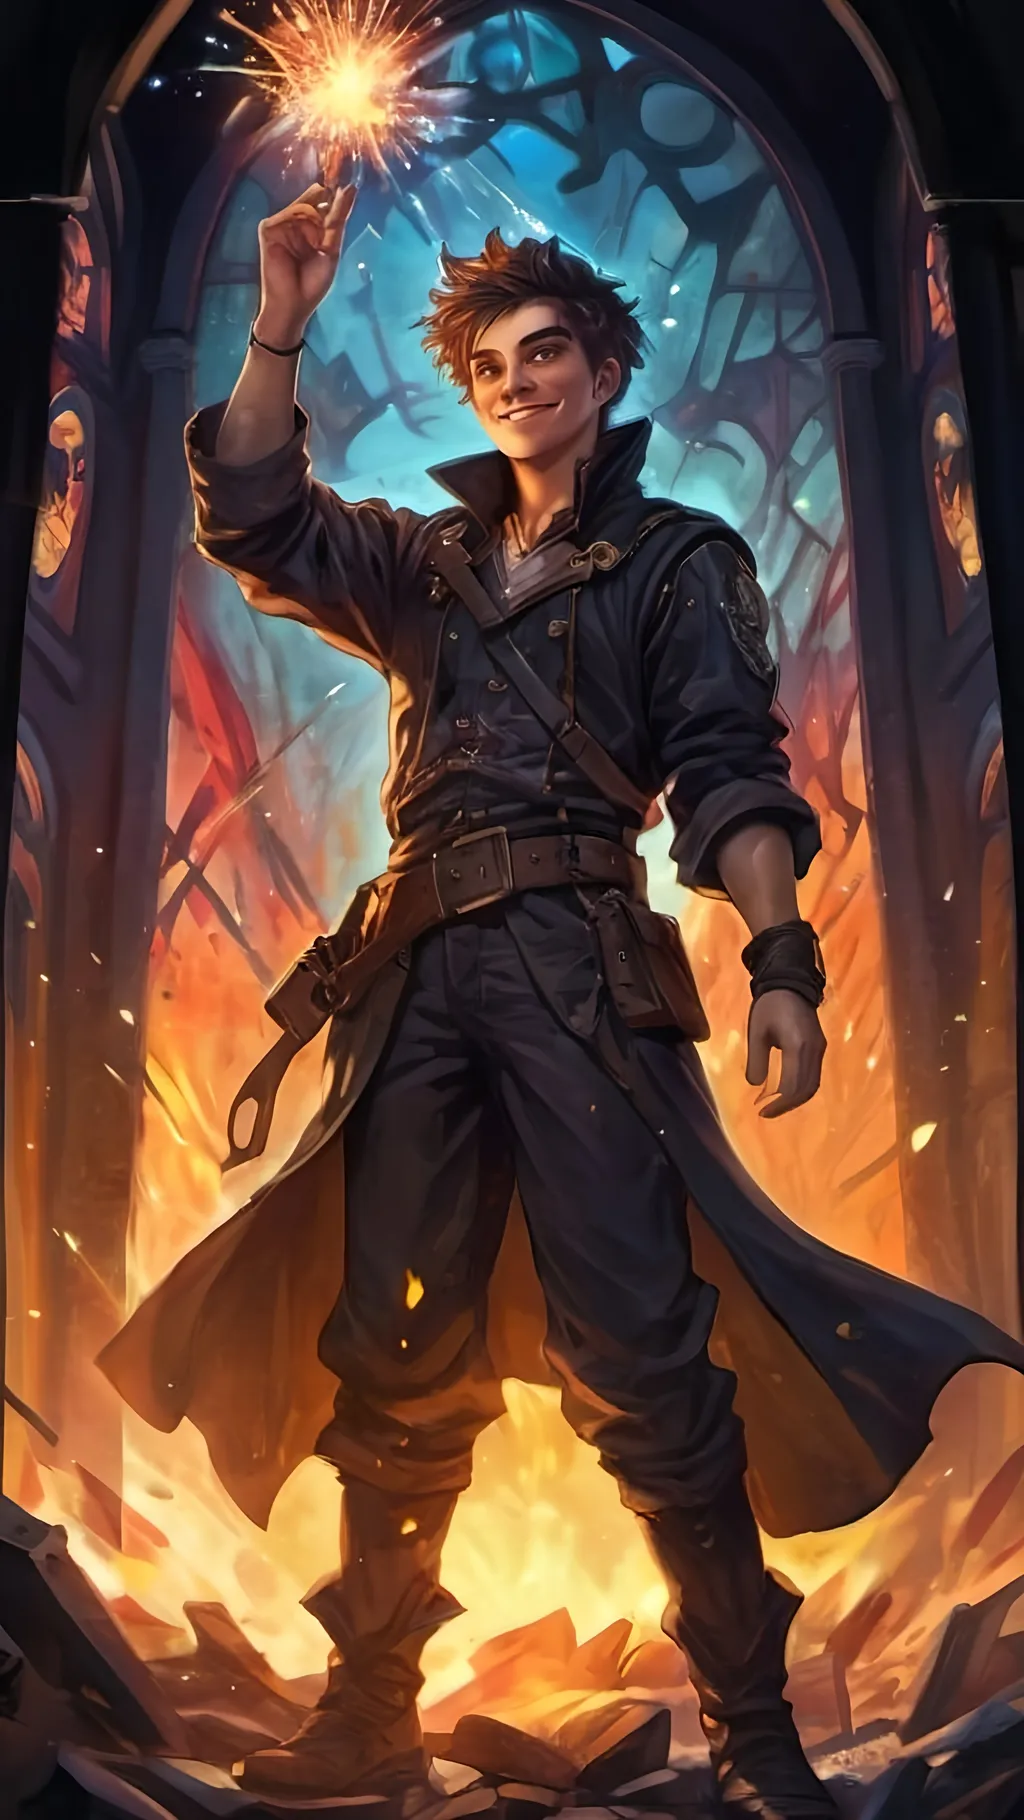 Prompt: A maddened young male artificer with a mad grin and covered in grime and oil stains. A floating magical spark floats above his open outstretched hand. He wears baggy black clothes and inventors goggles. He is surrounded by free flying fireworks, explosions and a war torn battlefield. Color enhance, High contrast, fantasy style, pirate style, vector style